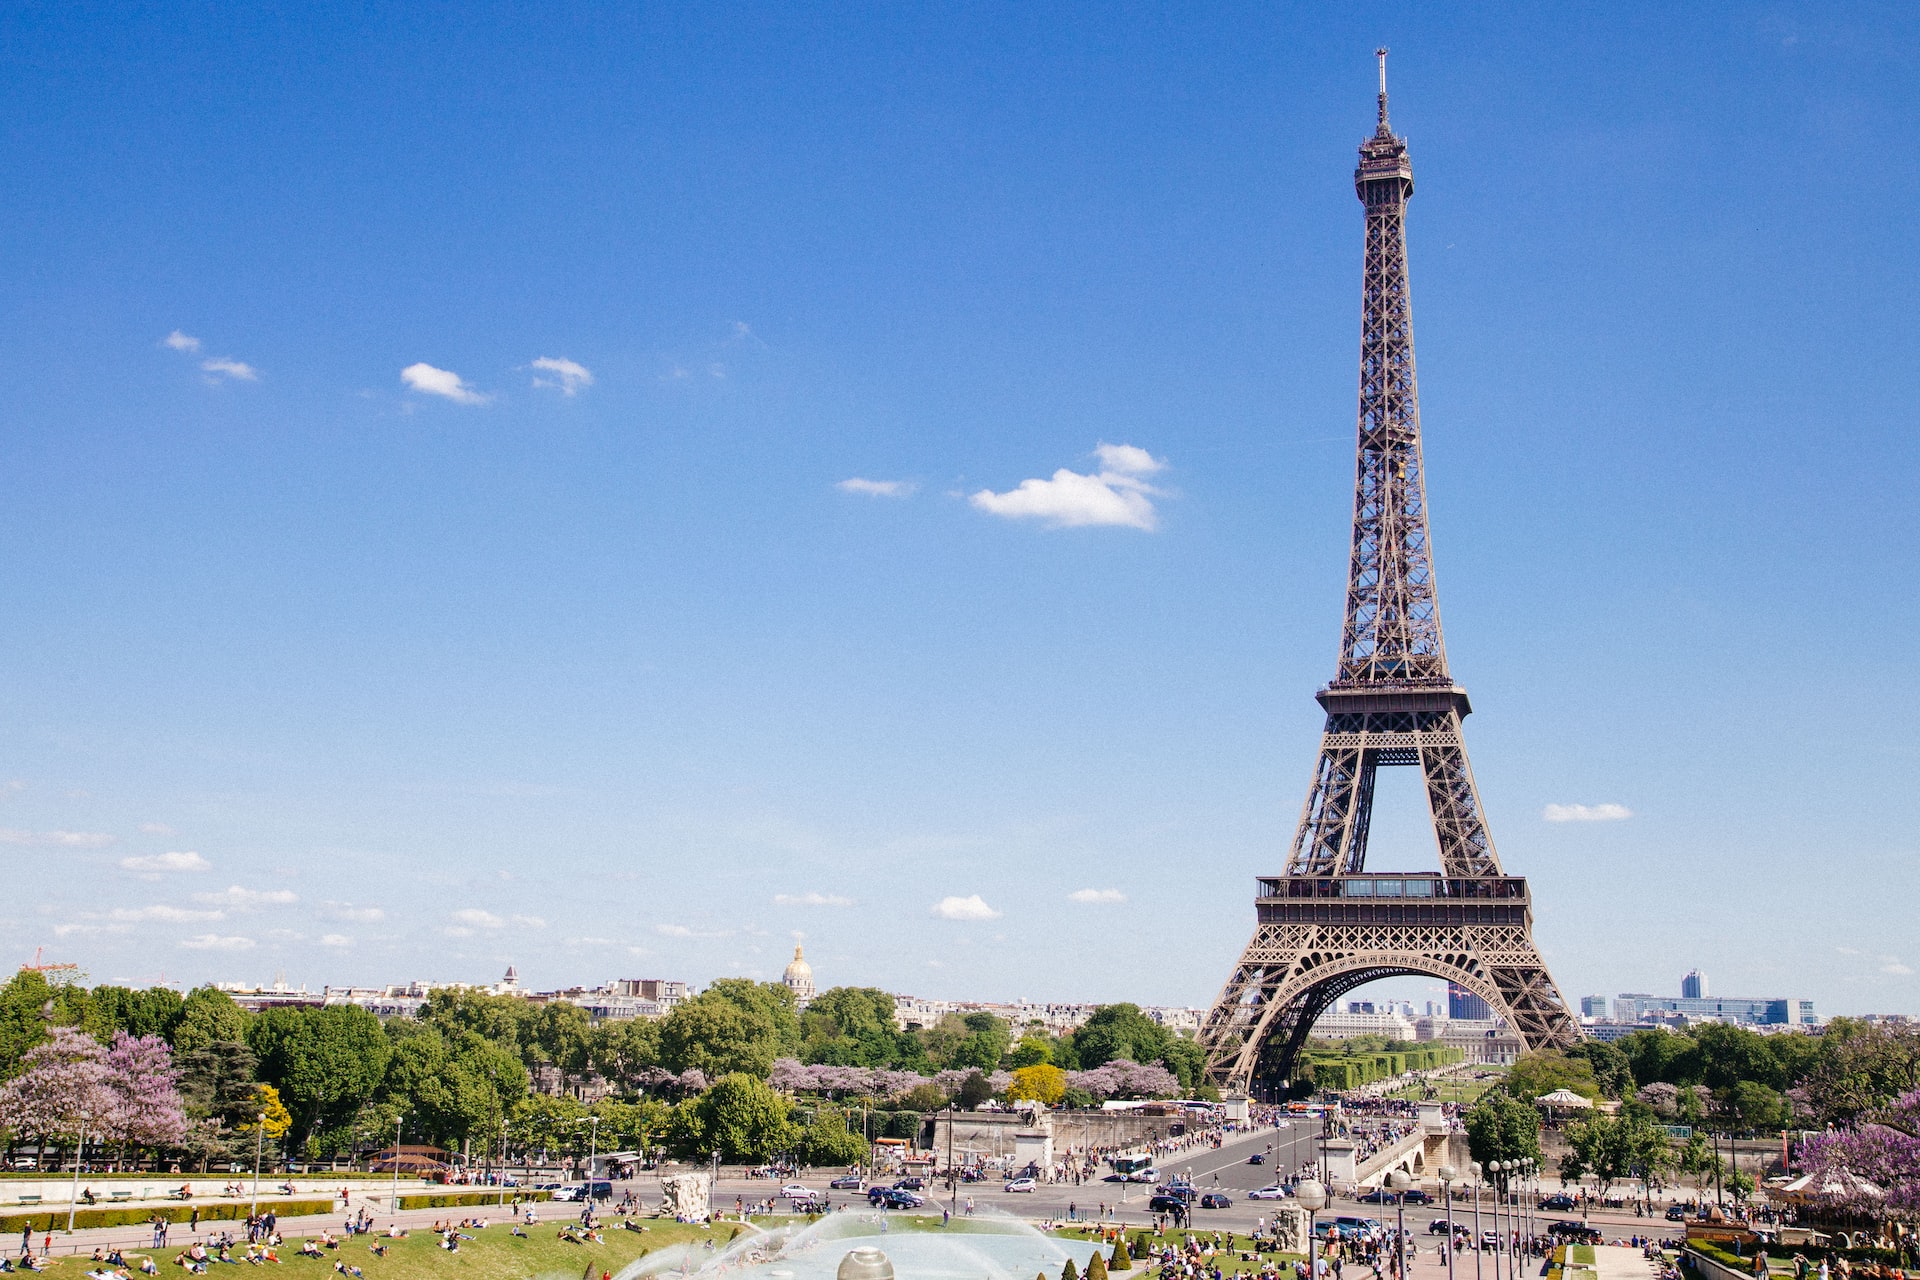 Is Paris Worth Visiting? Let’s Settle the Debate Once and
For All!